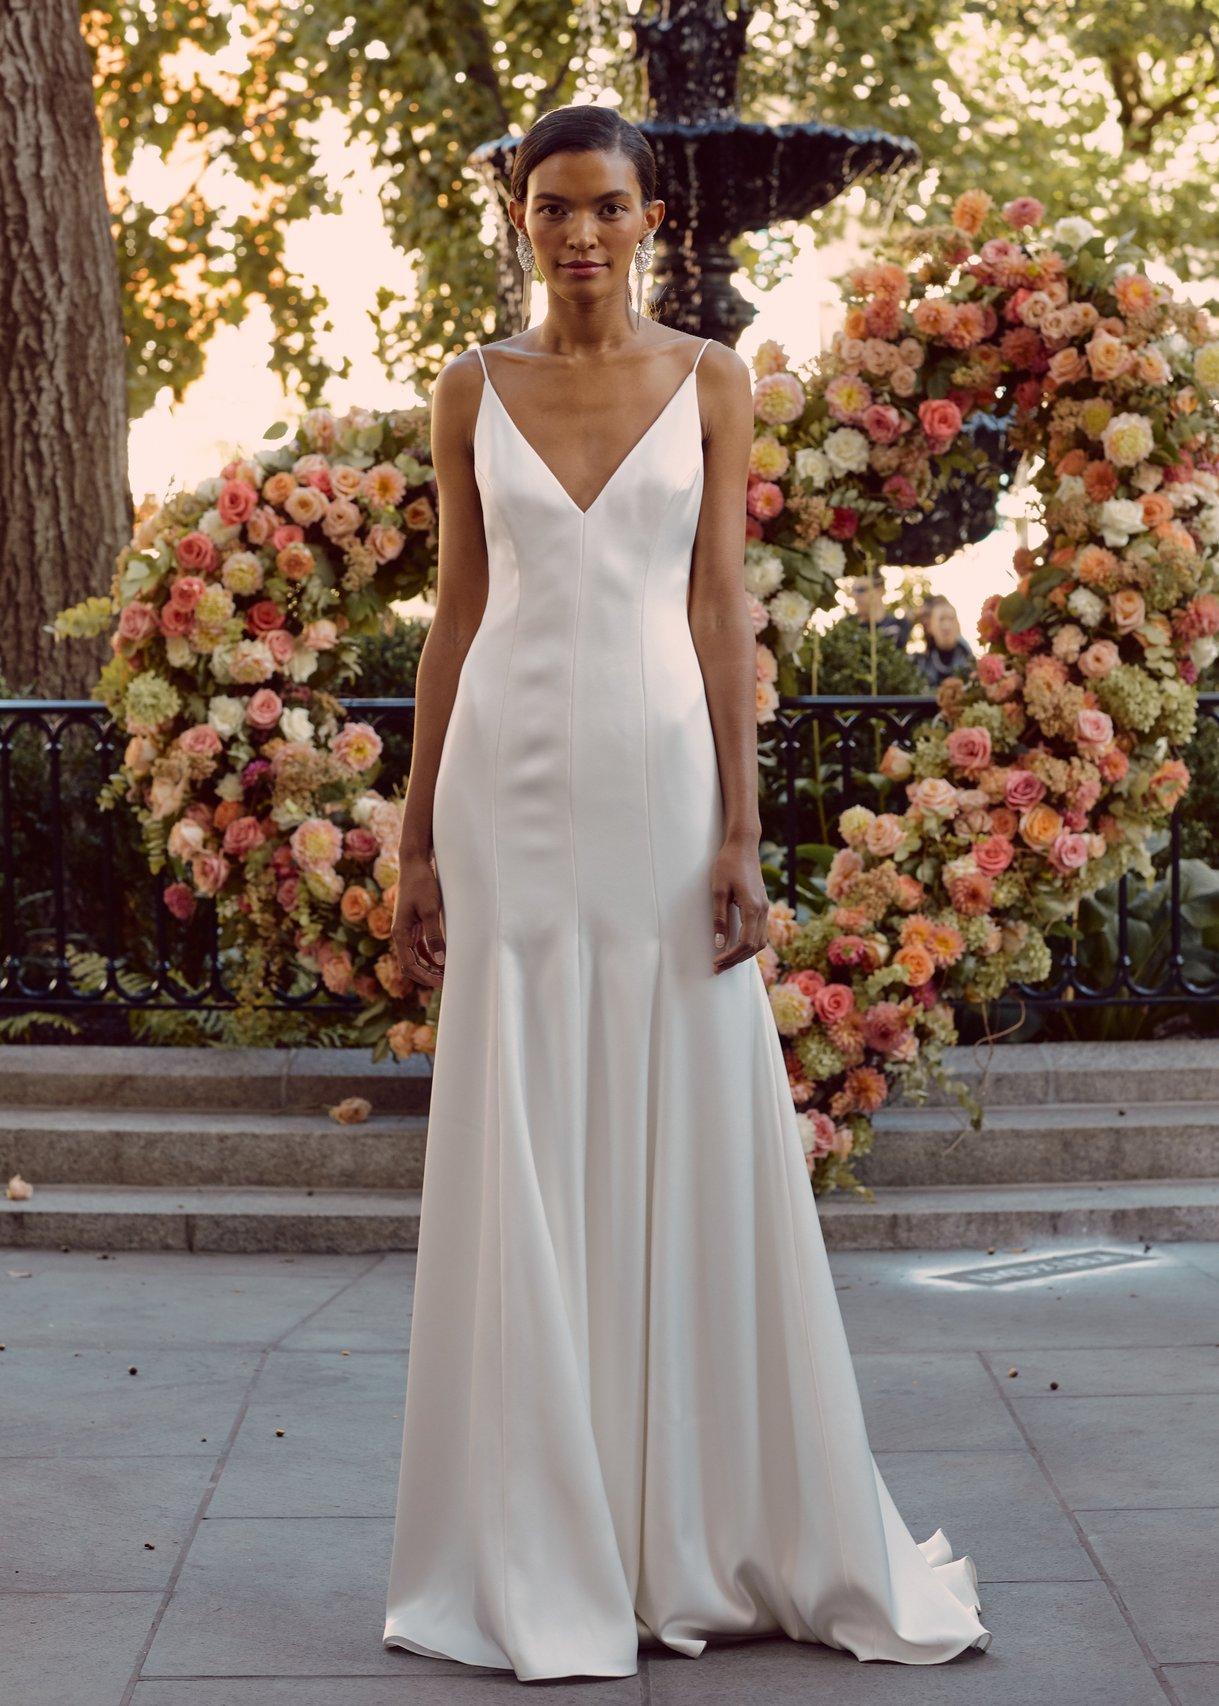 Minimalist Wedding Gowns Without Fuss